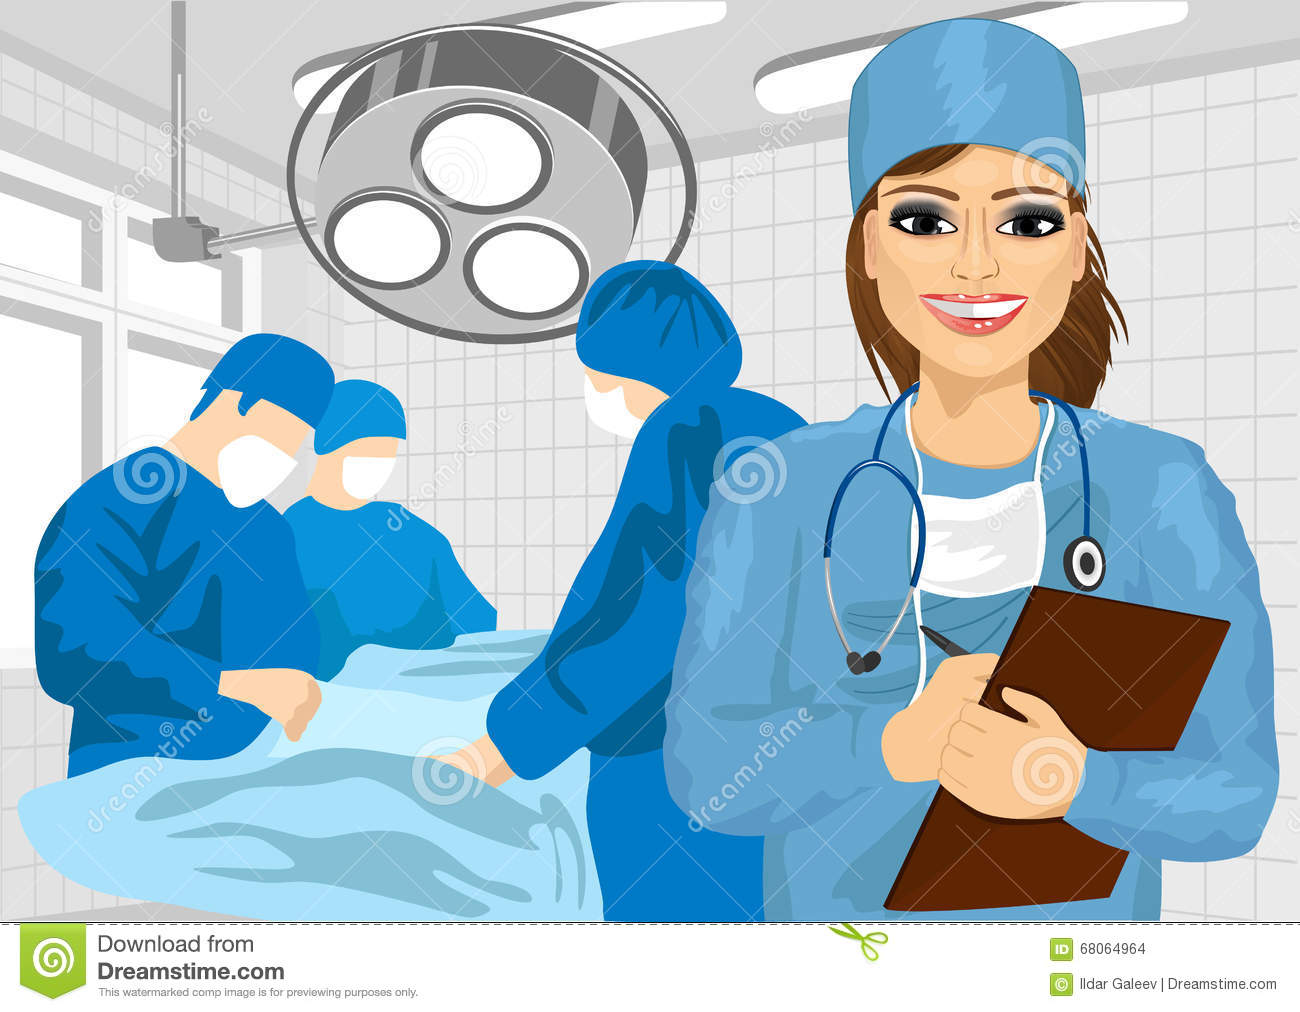 Postoperative quiz questions and answers - Trivia & Questions